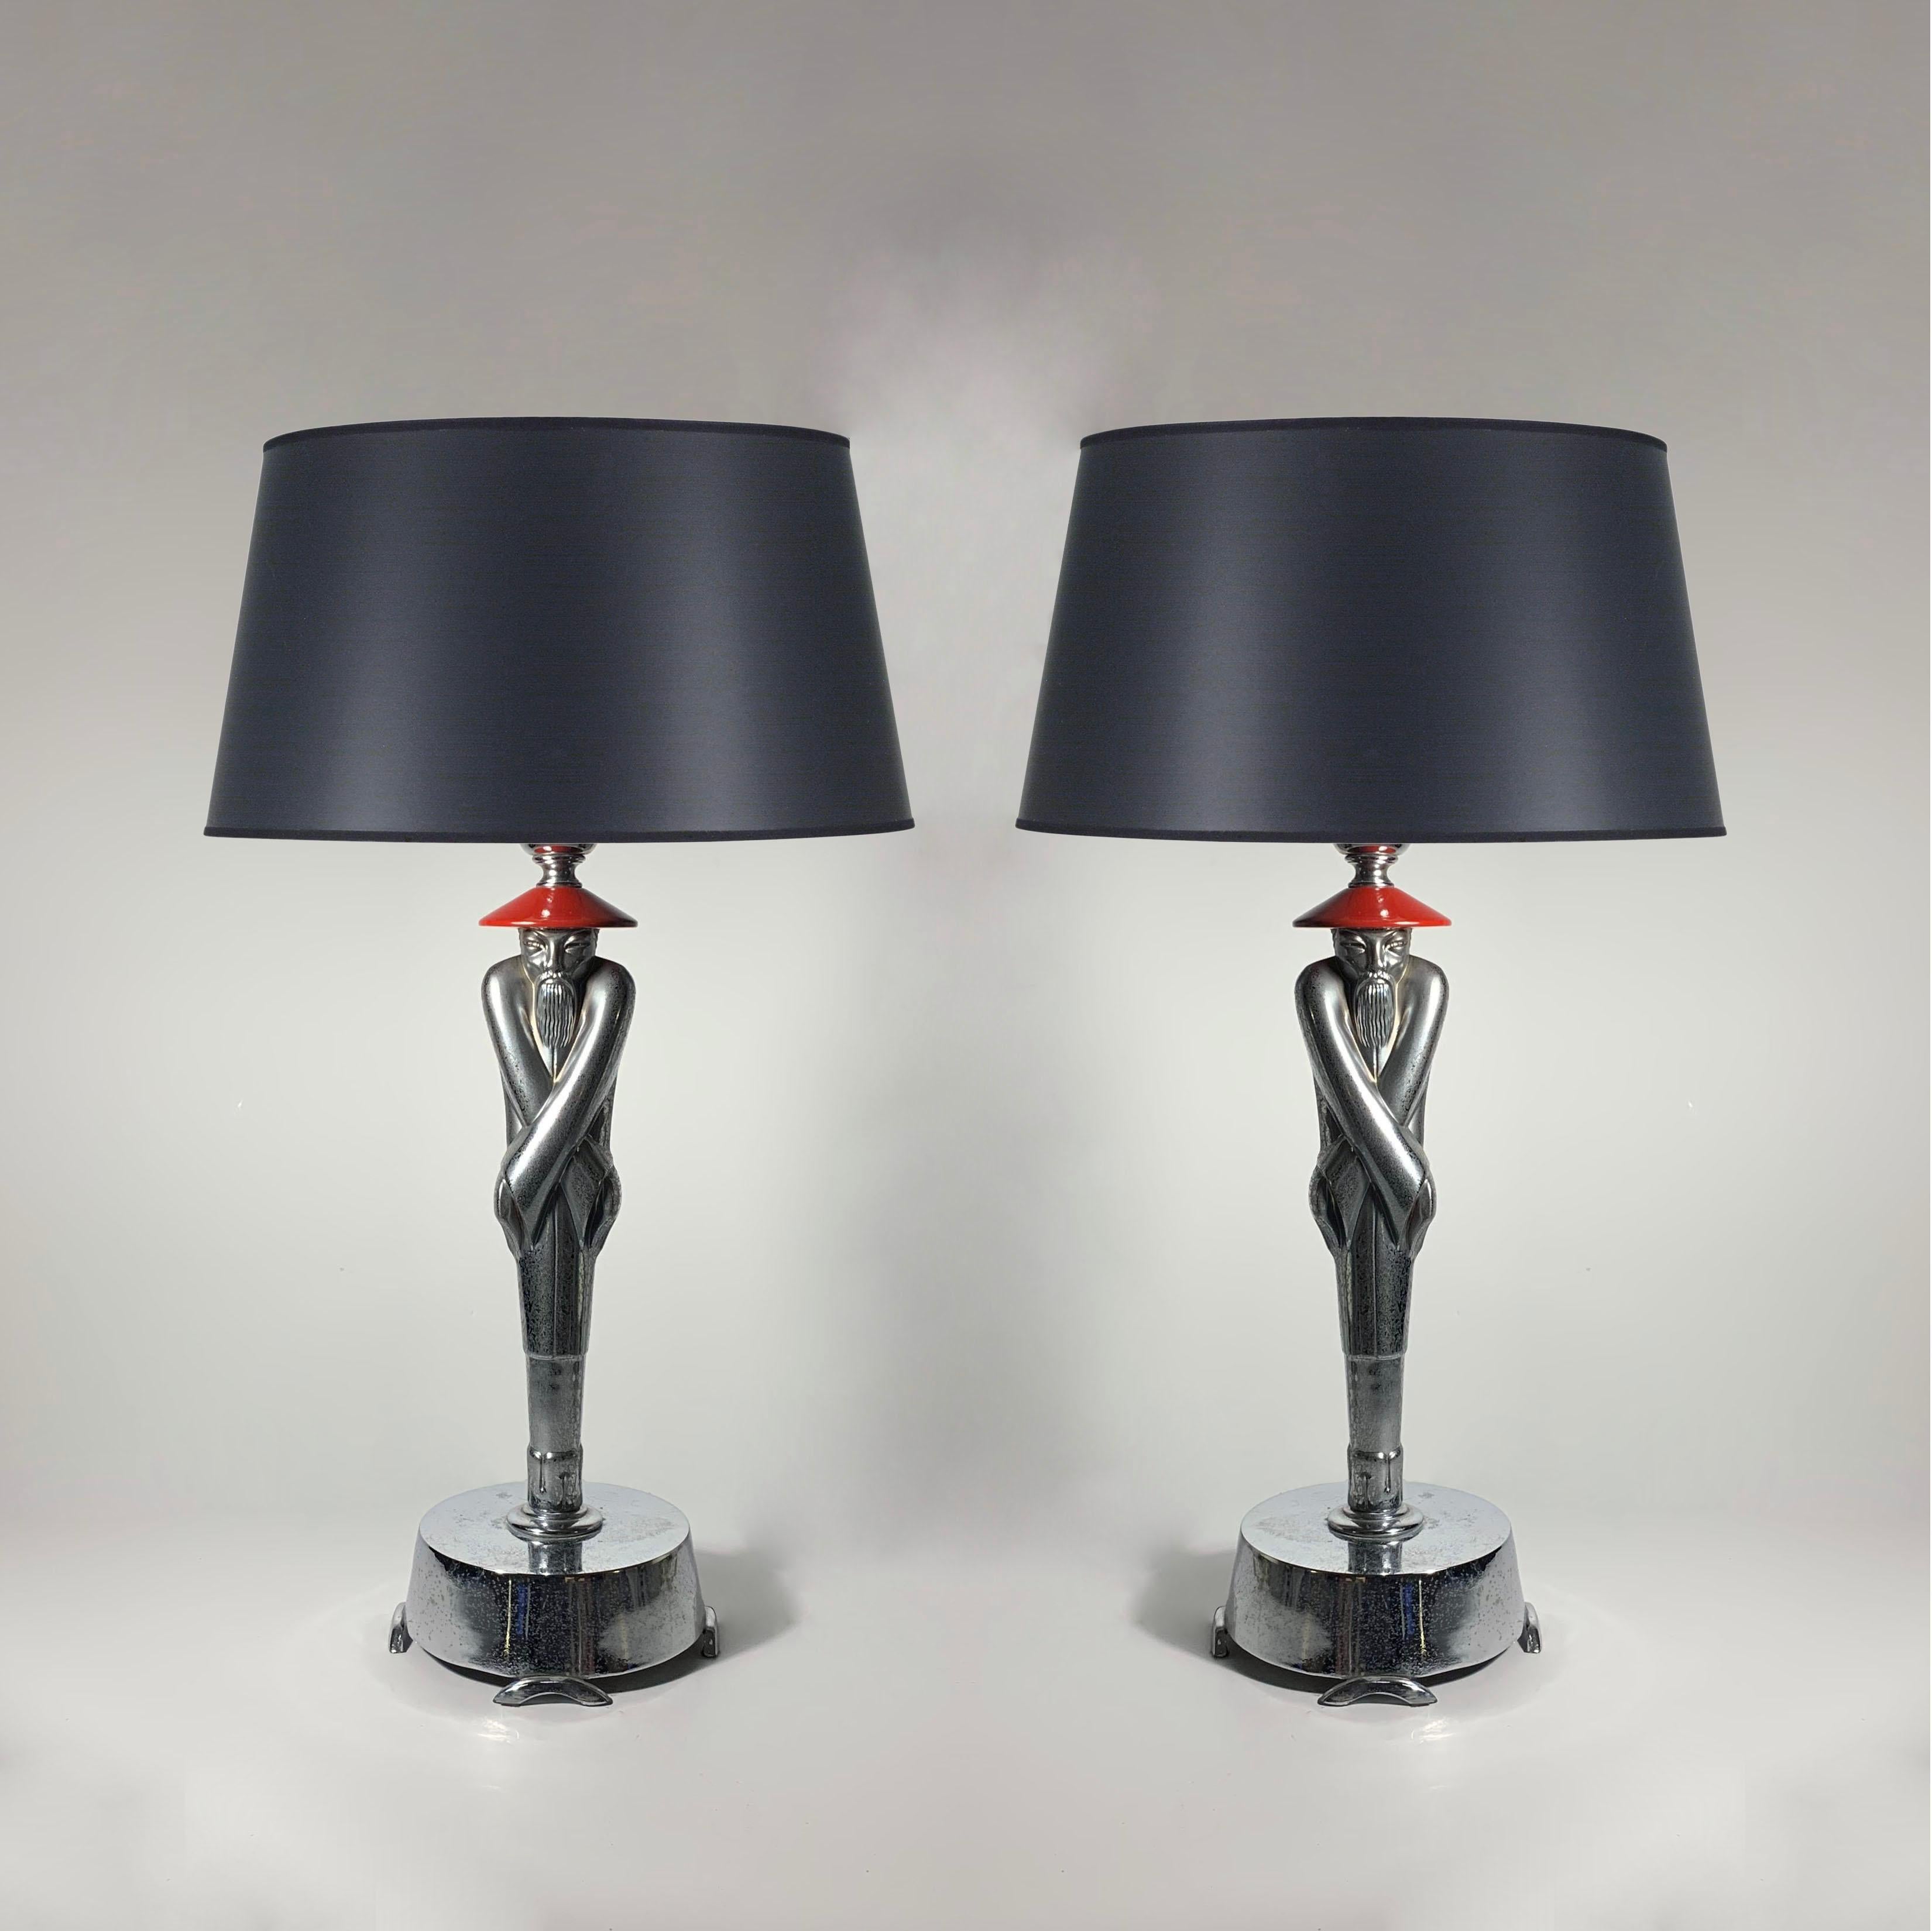 A period early pair of Viktor Schreckengost table lamps stylized in the asian / oriental taste. 

Places well into interiors of deco, hollywood regency, mid century modern, Paul Frankl and James Mont